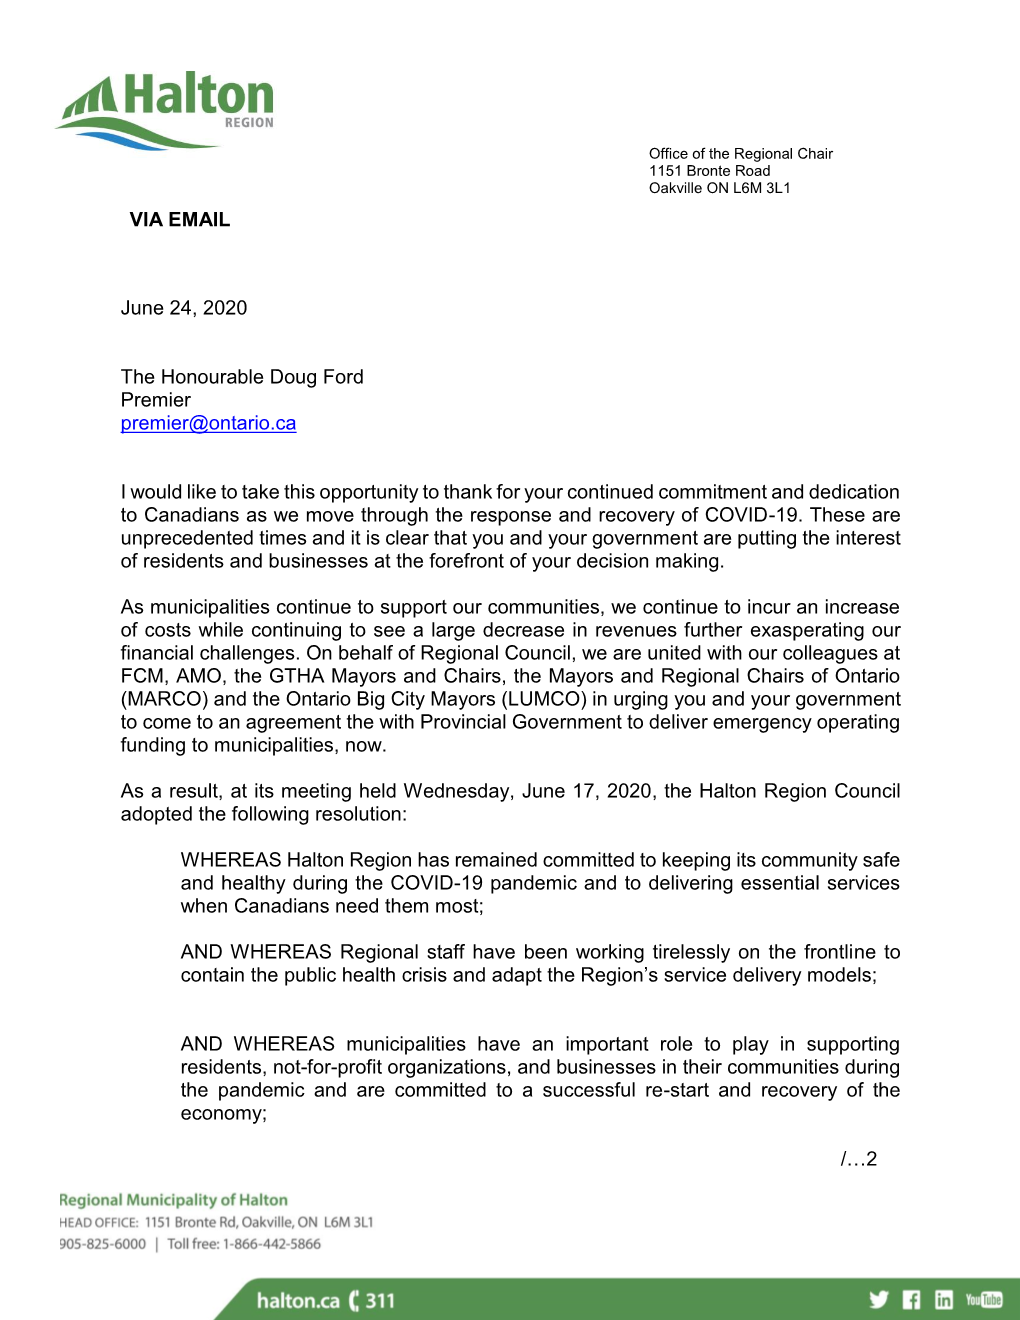 Letter to Premier Doug Ford from the Office of the Regional Chair